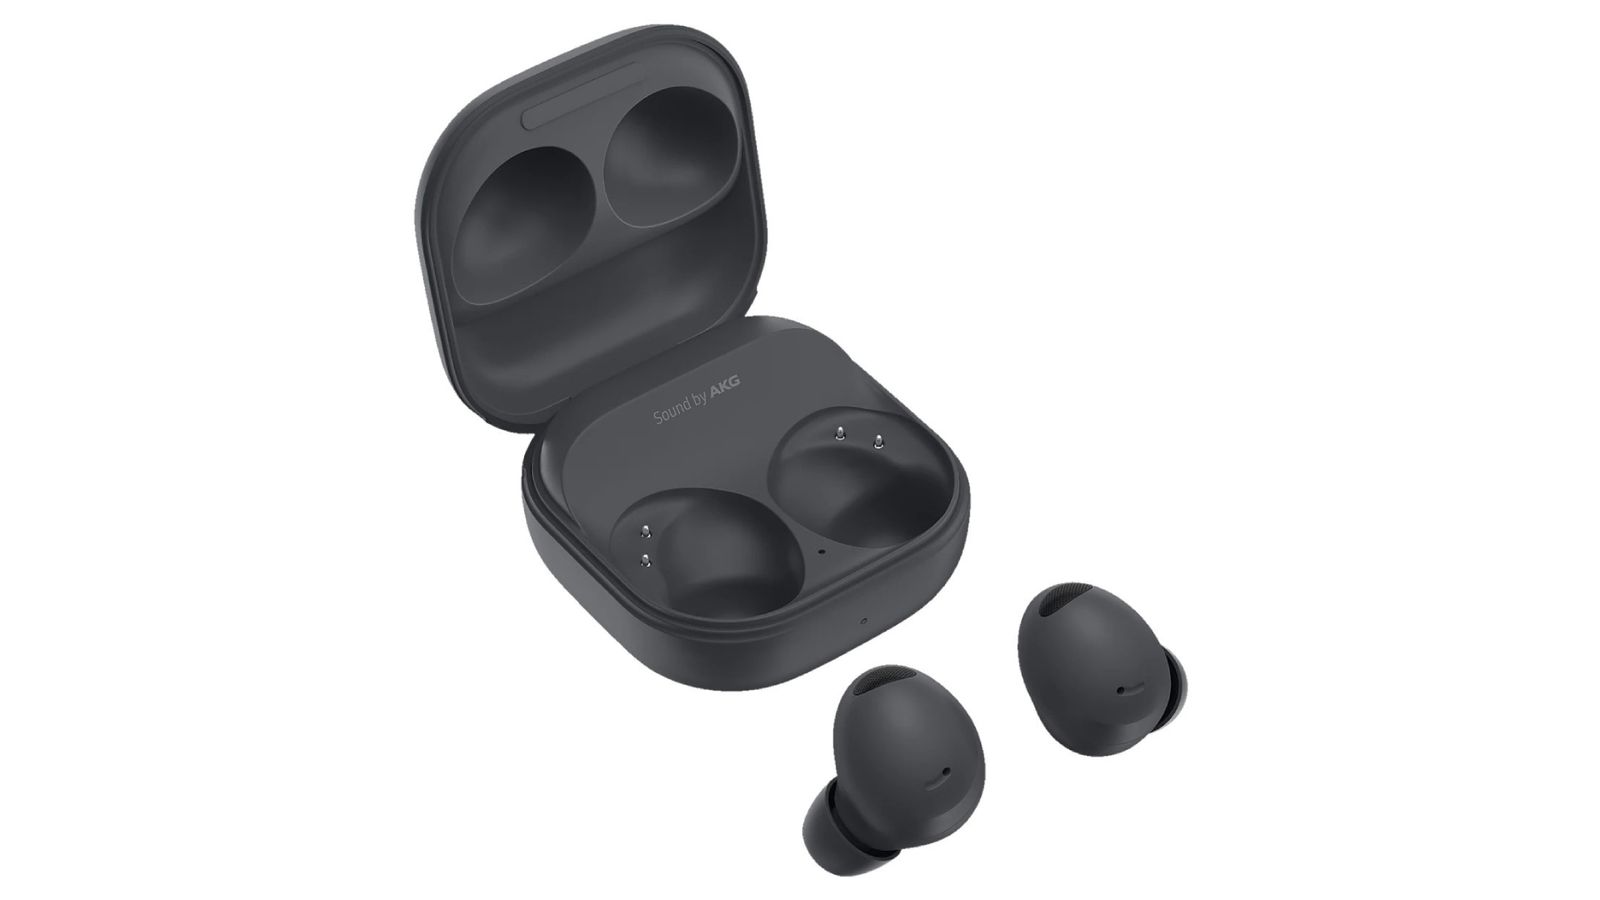 Best Android earbuds - Samsung Galaxy Buds2 Pro product image of two black wireless earbuds next to a black charging case.